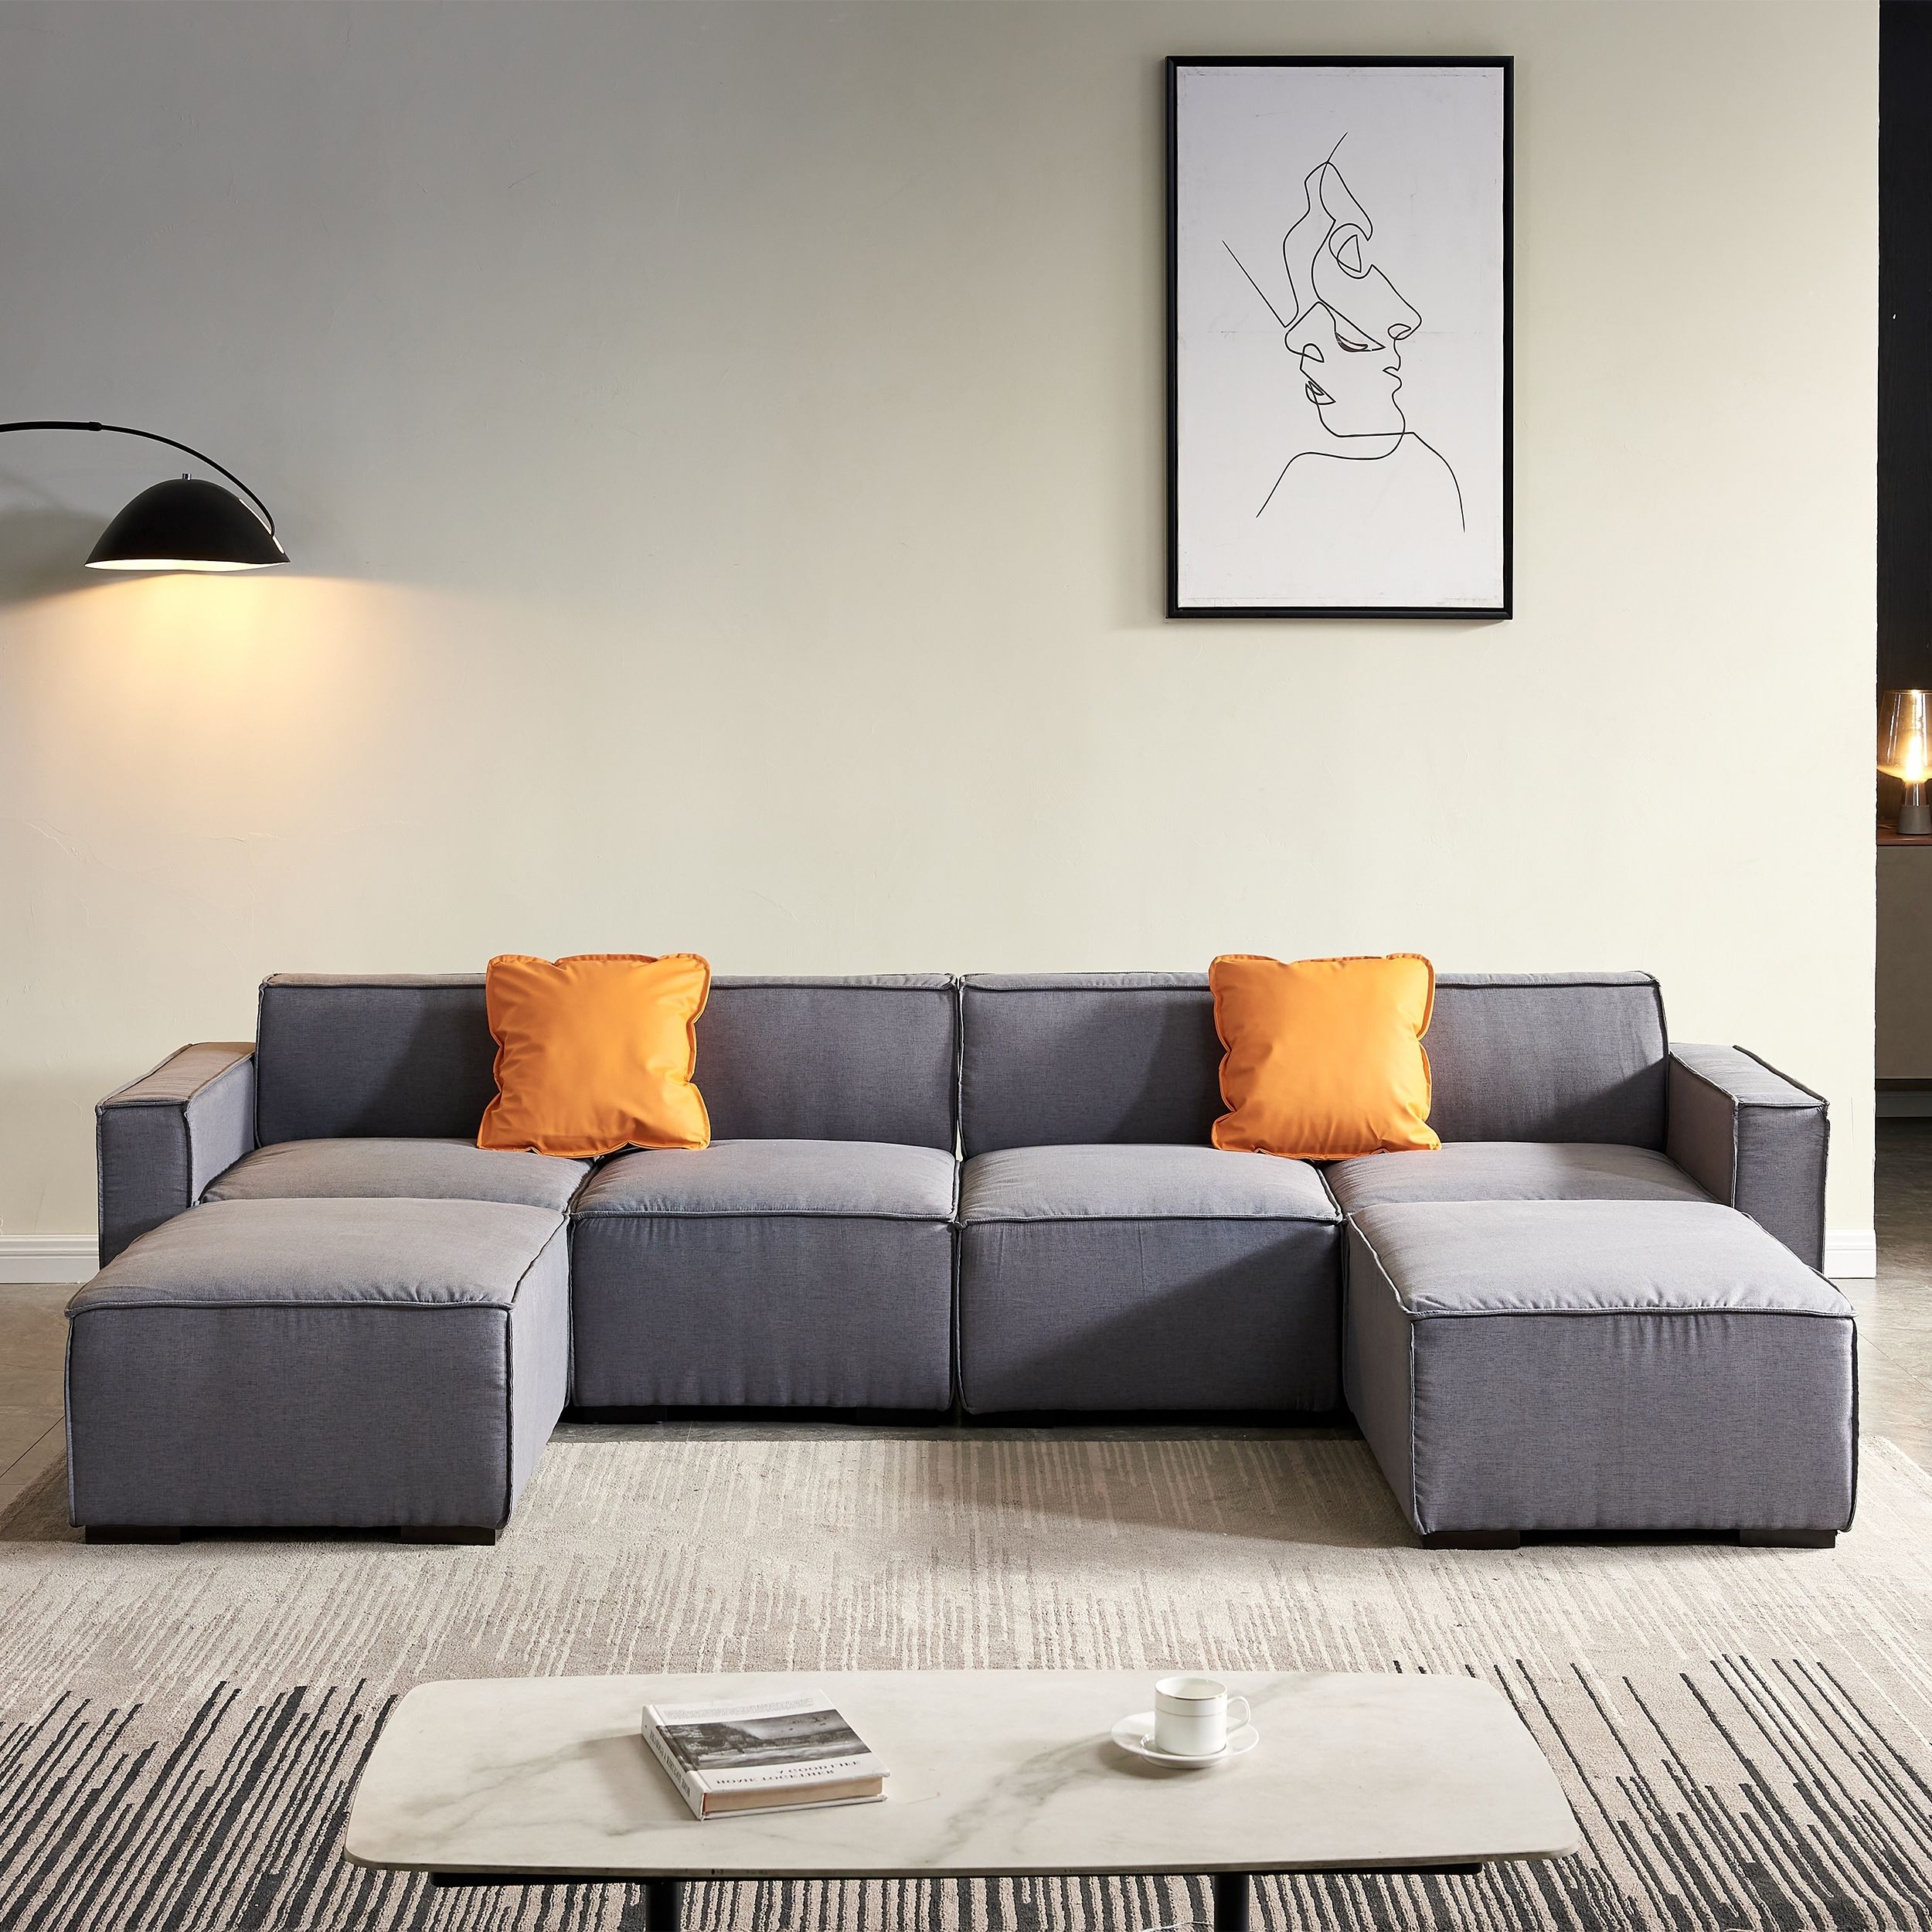 6 Seat Sectional Sofa Set Livingroom Modular Couch With 2 Ottoman&2 Pillows  – On Sale – – 36933437 With Regard To 6 Seater Modular Sectional Sofas (Gallery 13 of 20)